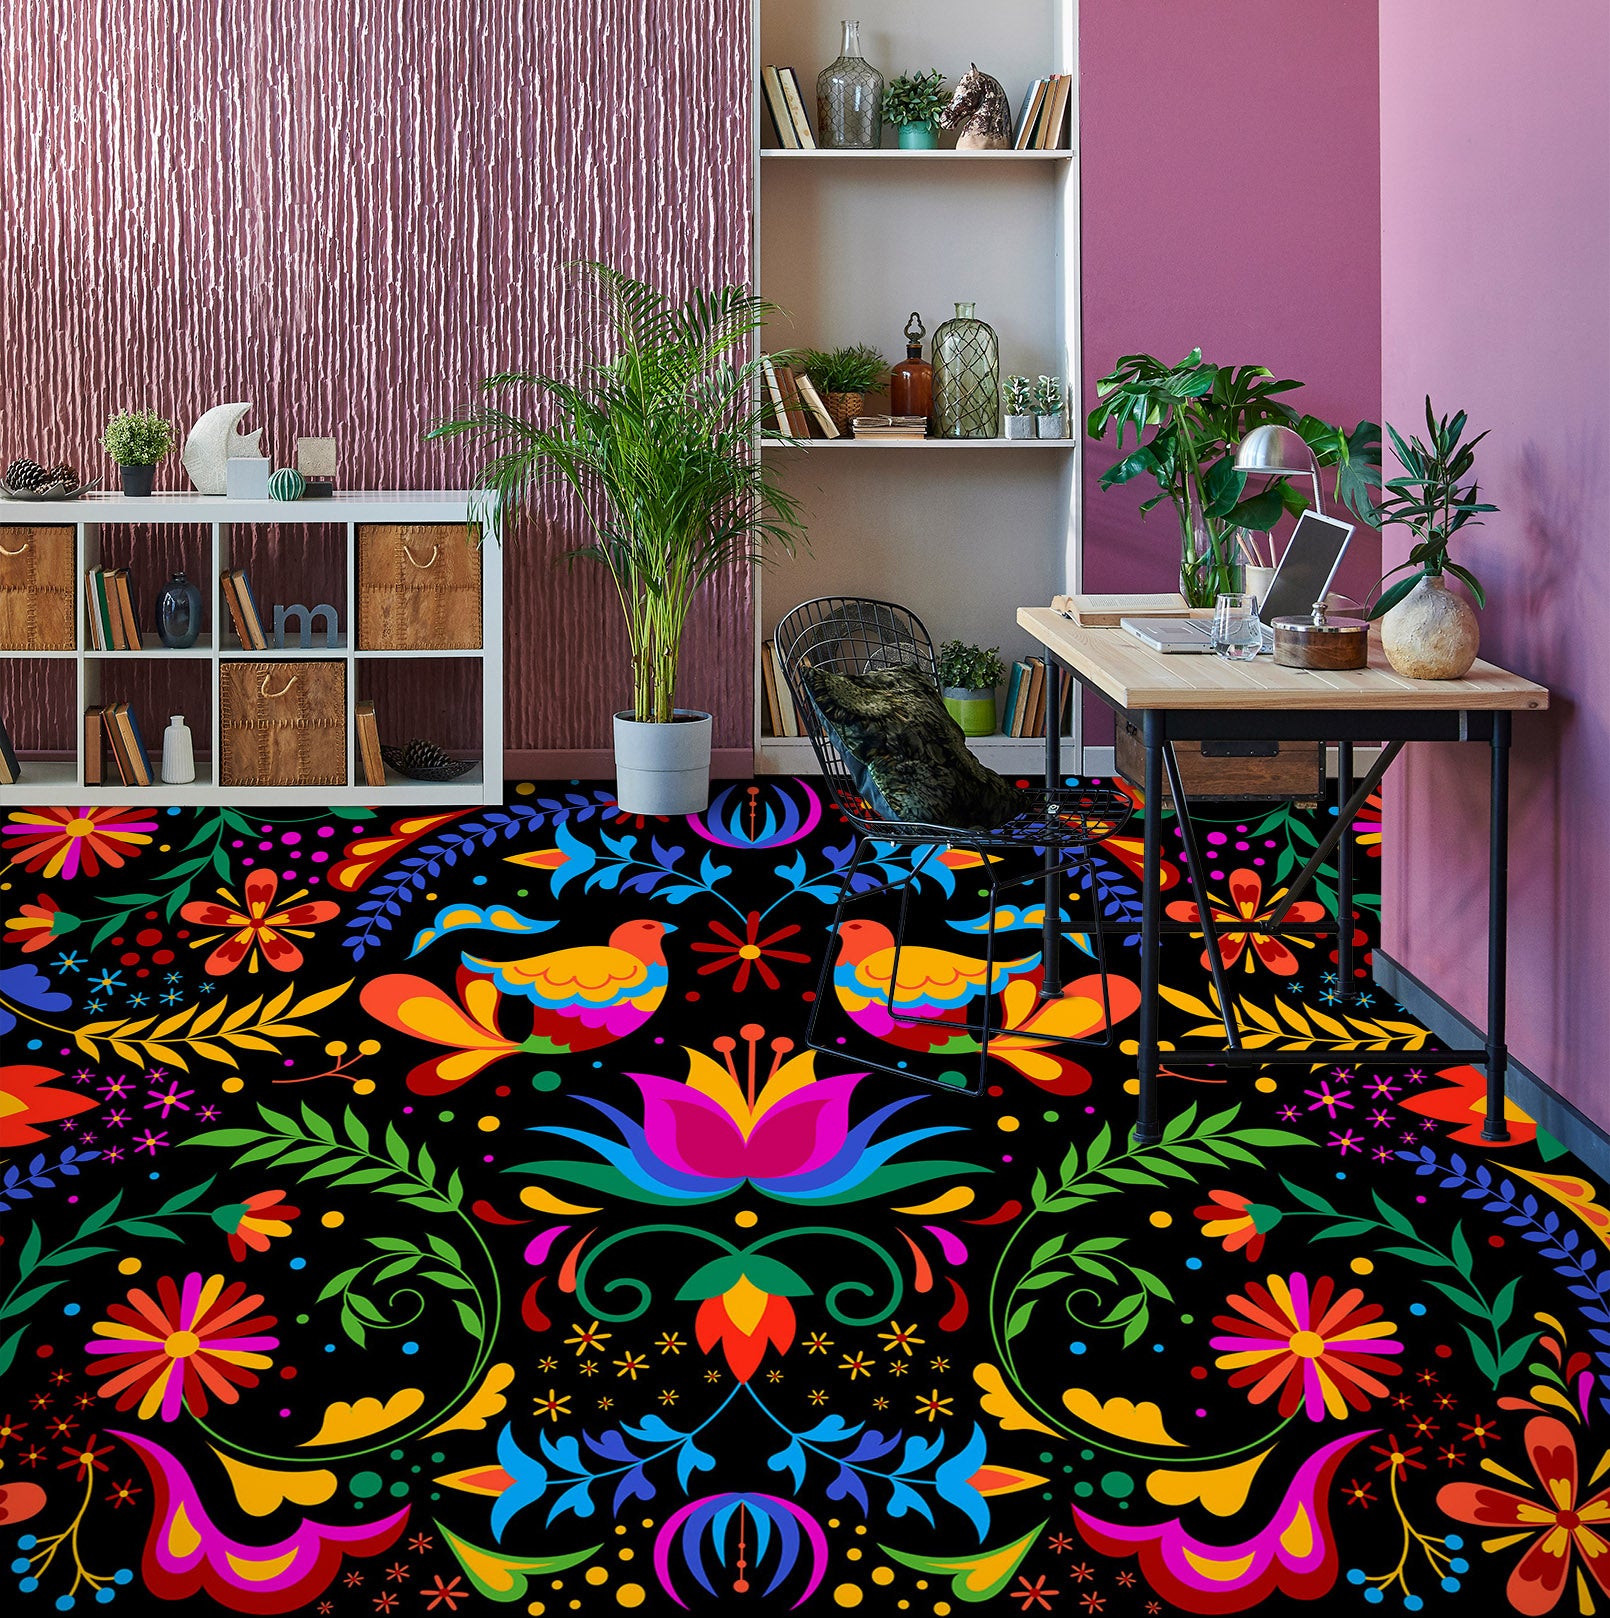 3D Intensely Colored Flowers 1277 Floor Mural  Wallpaper Murals Self-Adhesive Removable Print Epoxy